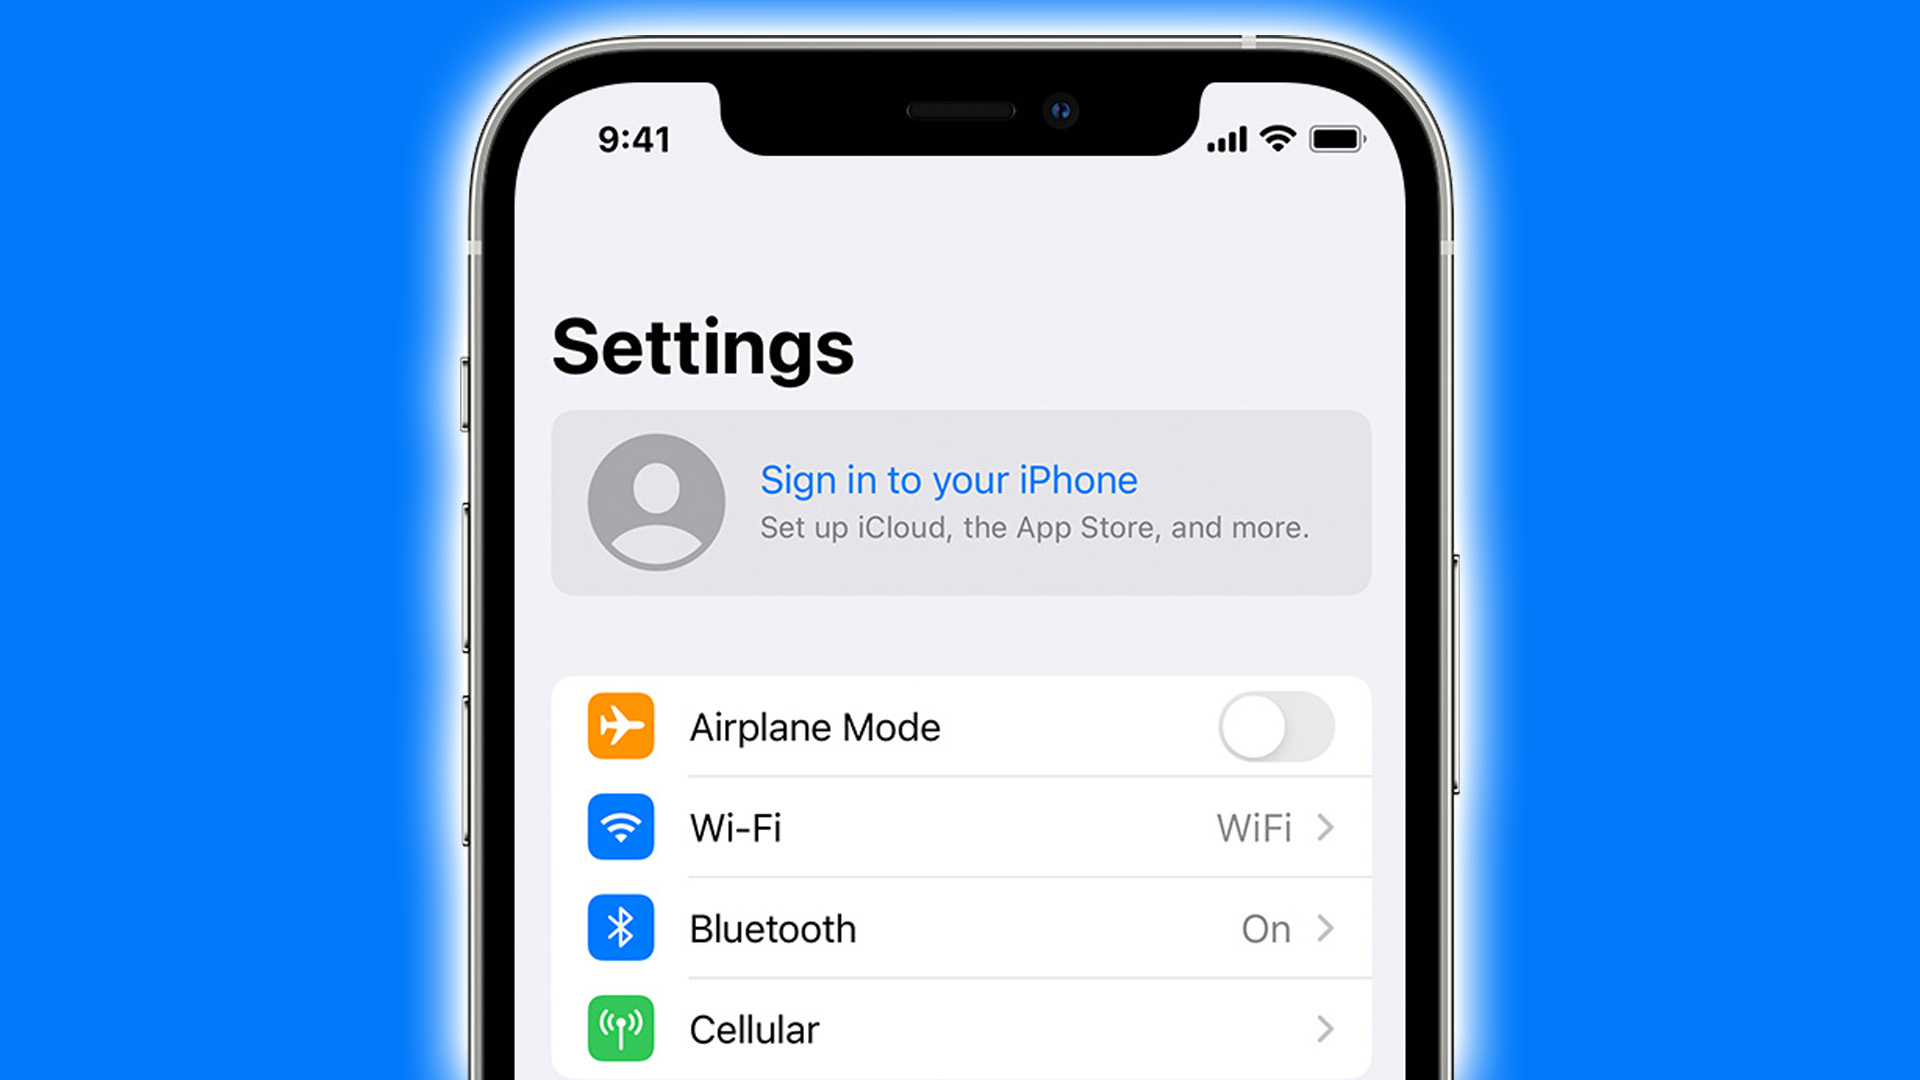 password-free-factory-reset-wiping-iphone-11-settings